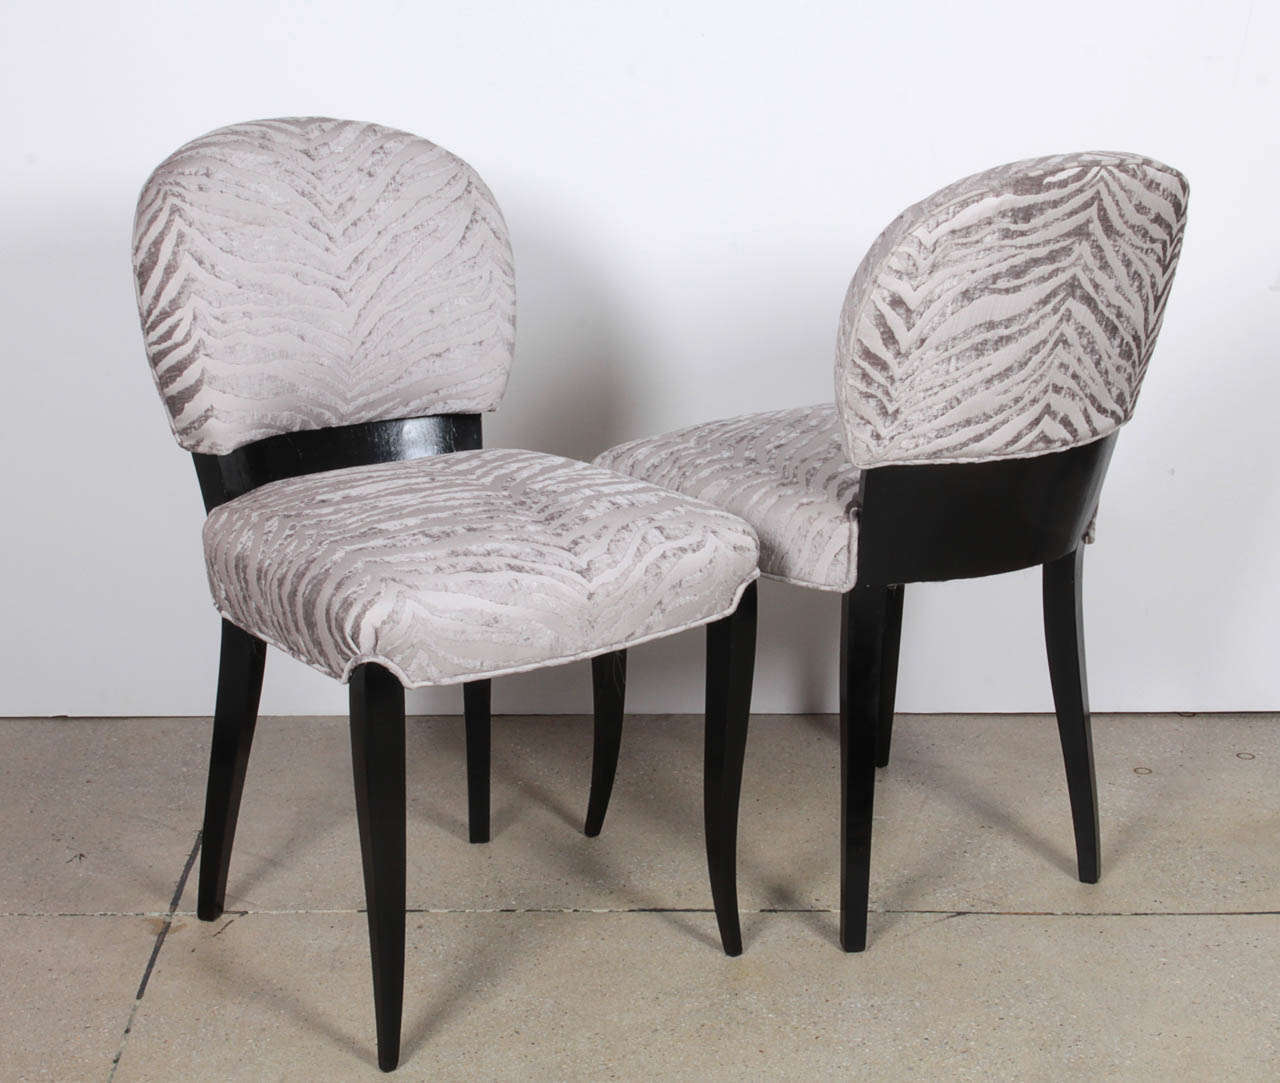 Velvet Luxurious Pair of Black Lacquer Art Deco Side Chairs